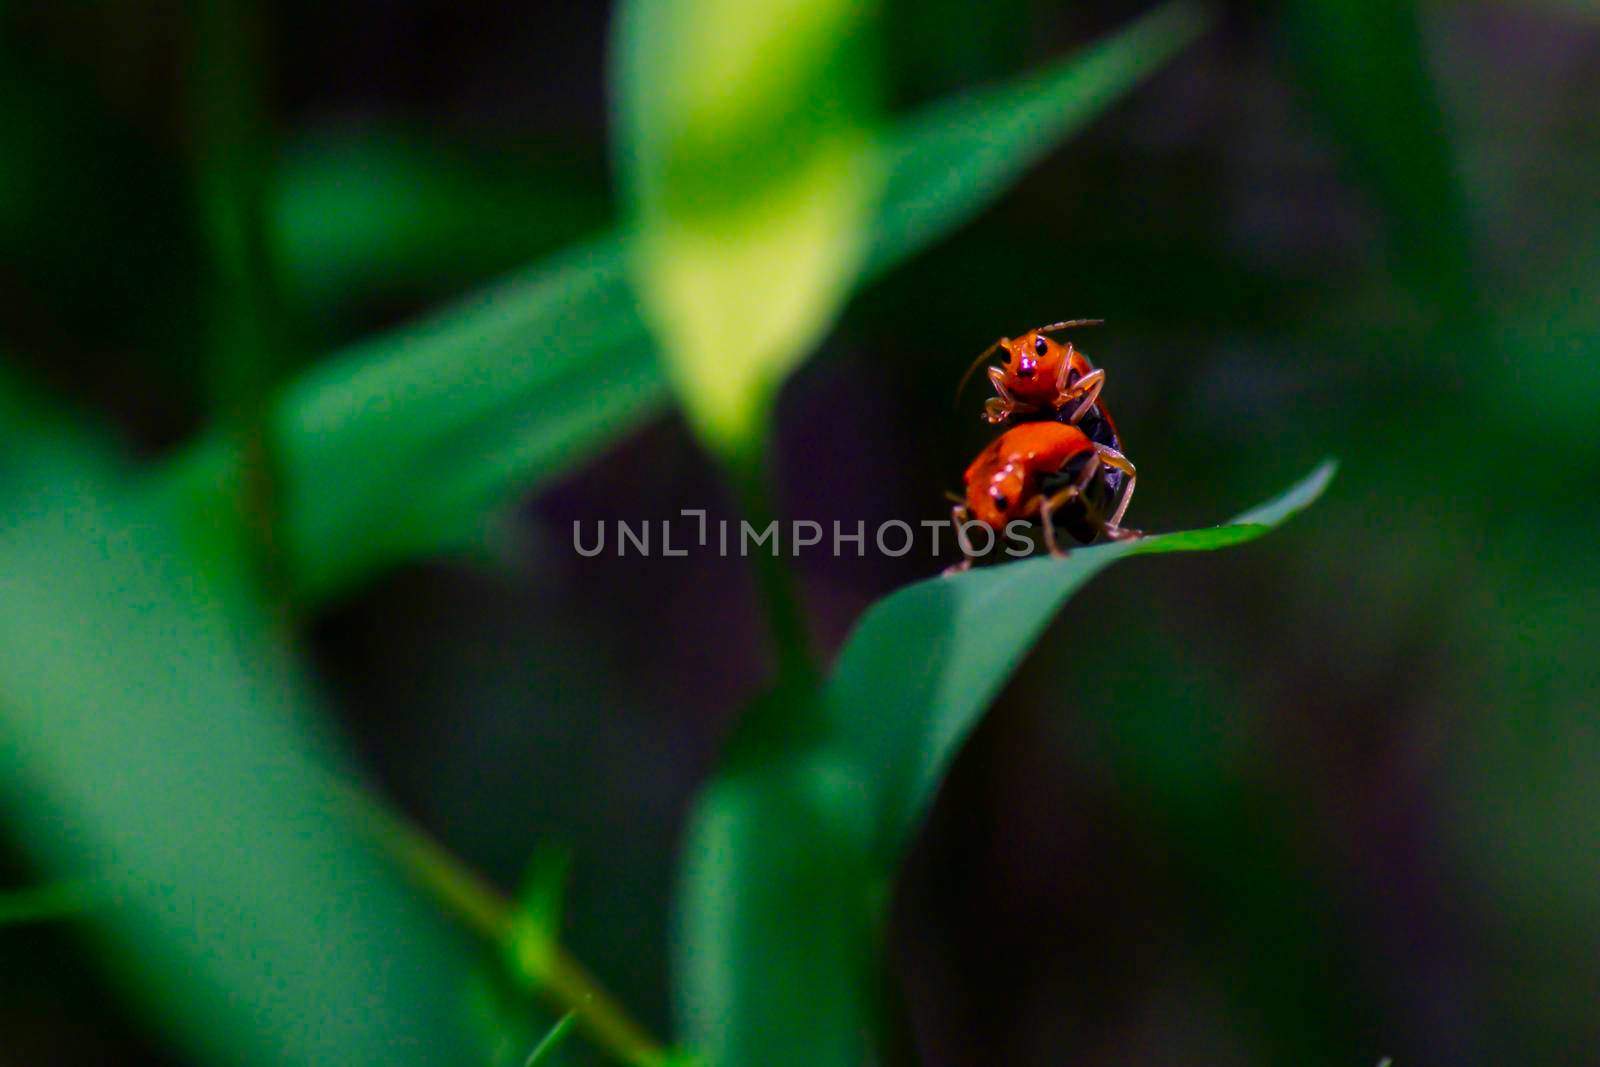 The small ants orange insect, lover ants ,relationship concept idea of love and friendship. Close up photography by Petrichor